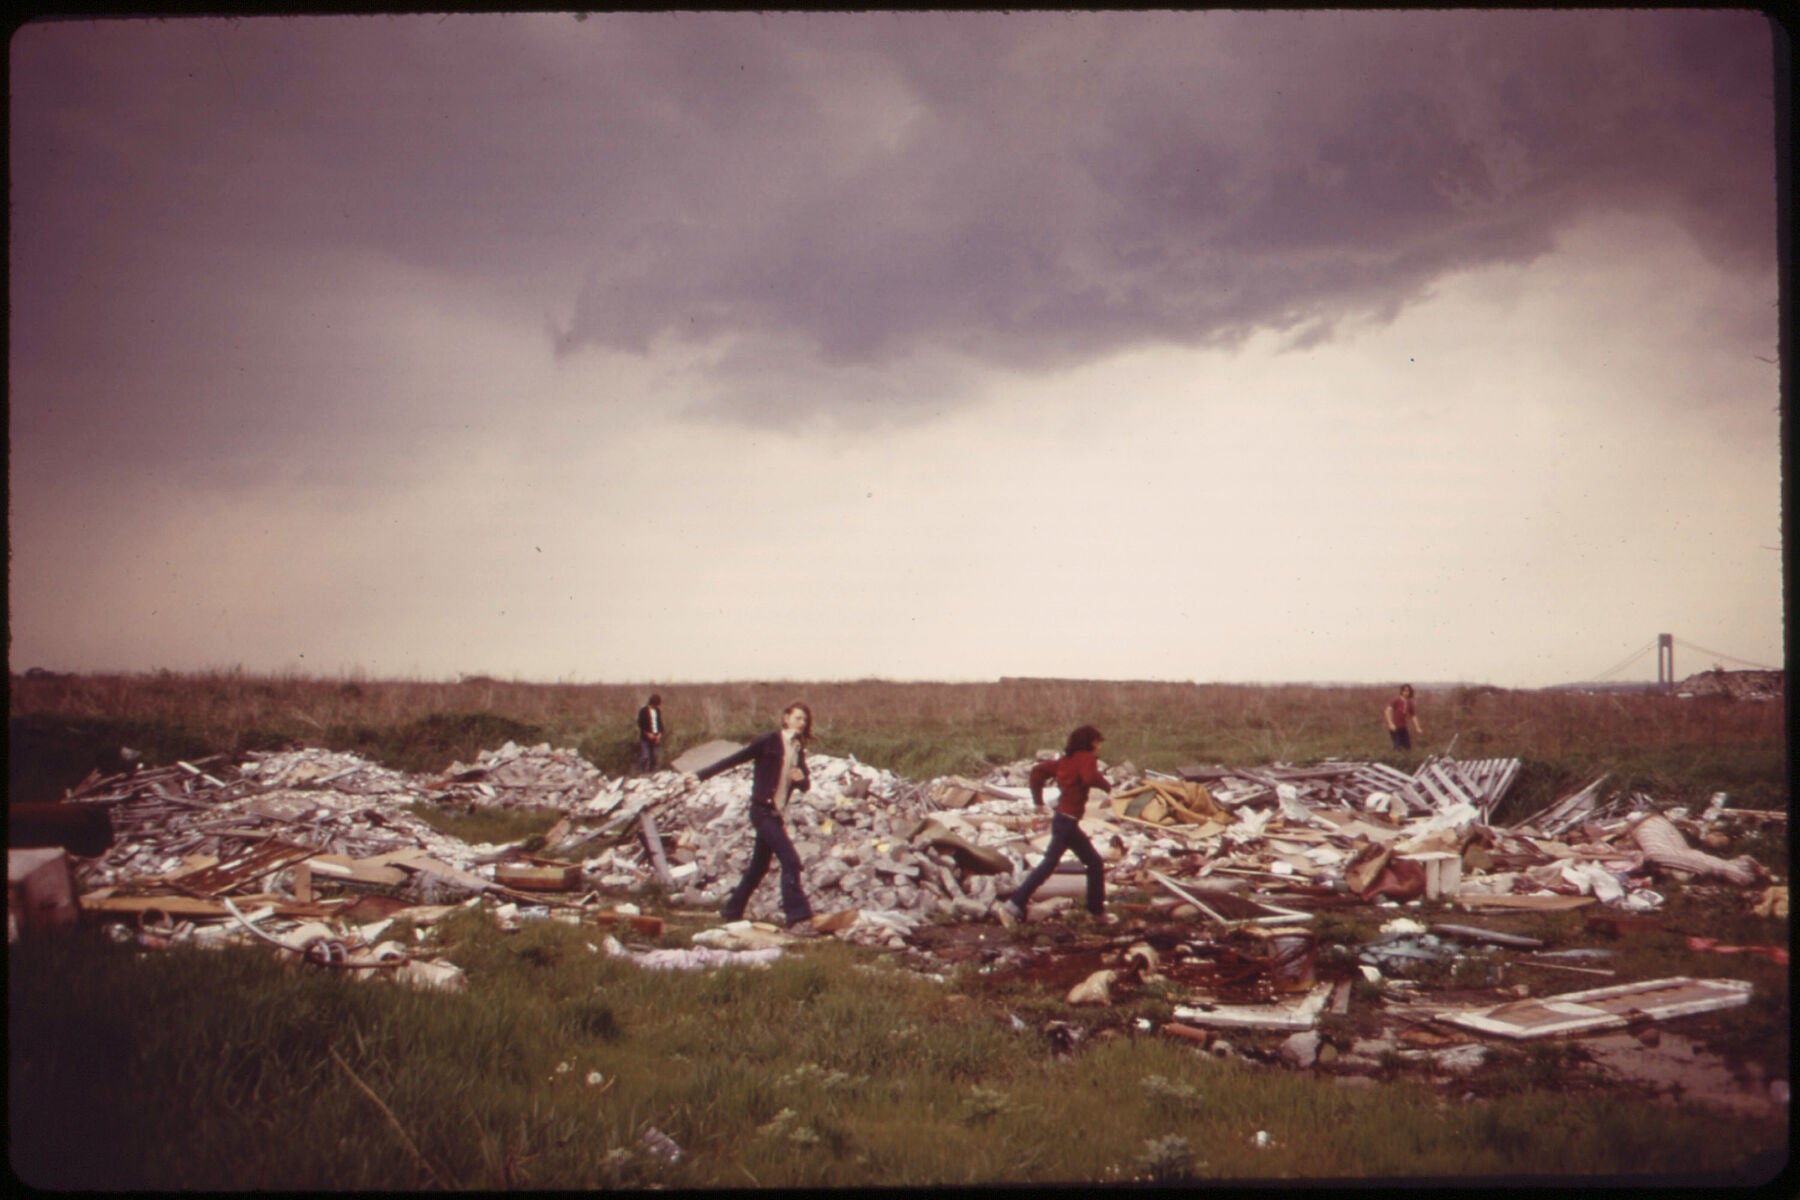 Municipal Incineration Plant and Landfill Dump at Gravesend Bay Serves as Playground for Neighborhood Boys by Arthur Tress - 1973